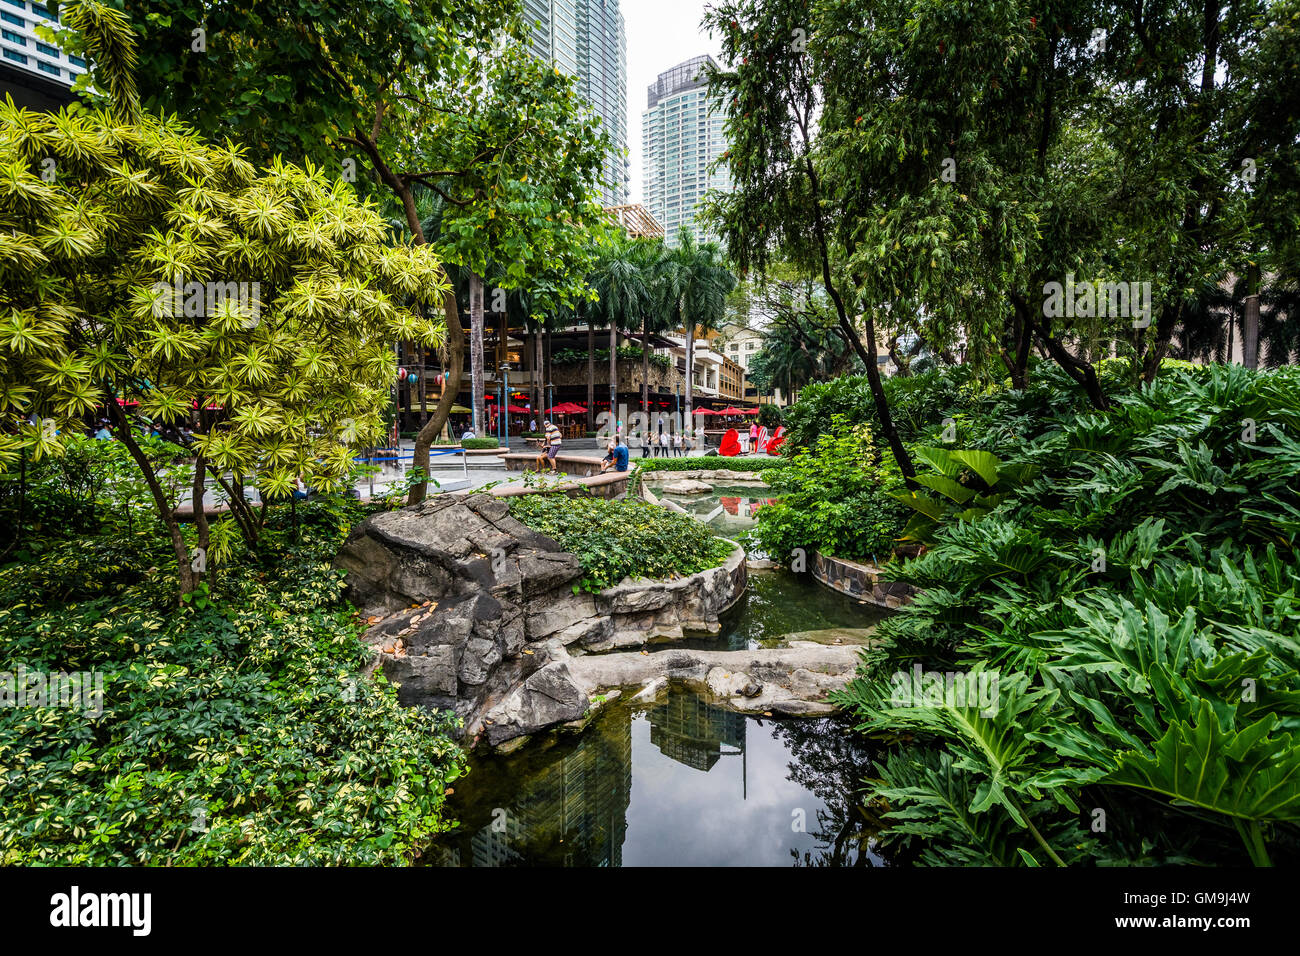 Garden And Skyscrapers At Greenbelt Park, In Ayala, Makati, Metro Manila,  The Philippines. Stock Photo, Picture and Royalty Free Image. Image  54904214.